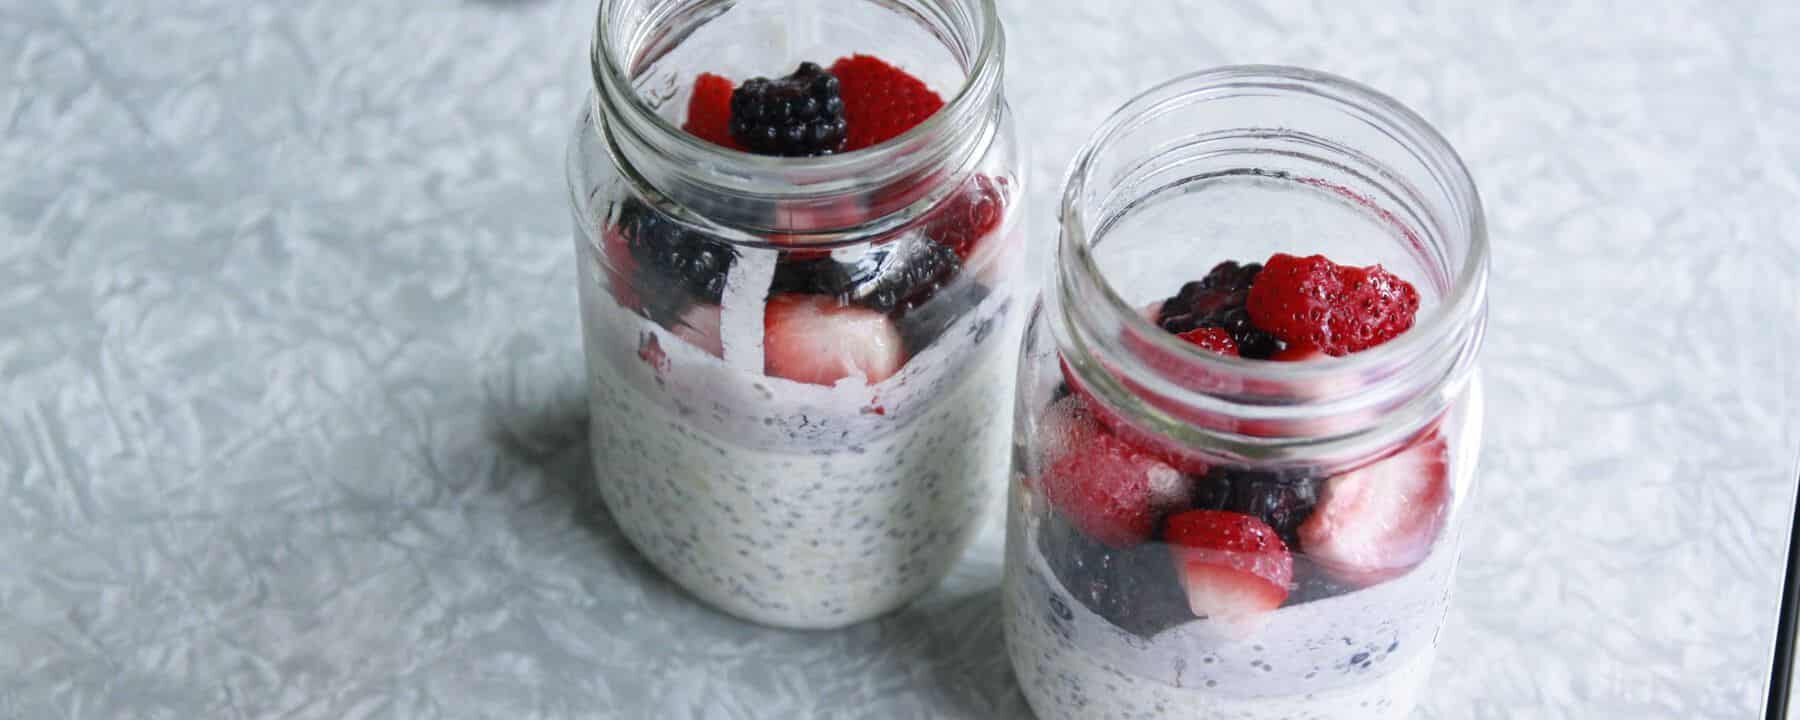 CARE Recipe: No-Cook Overnight Oatmeal Cups with Berries